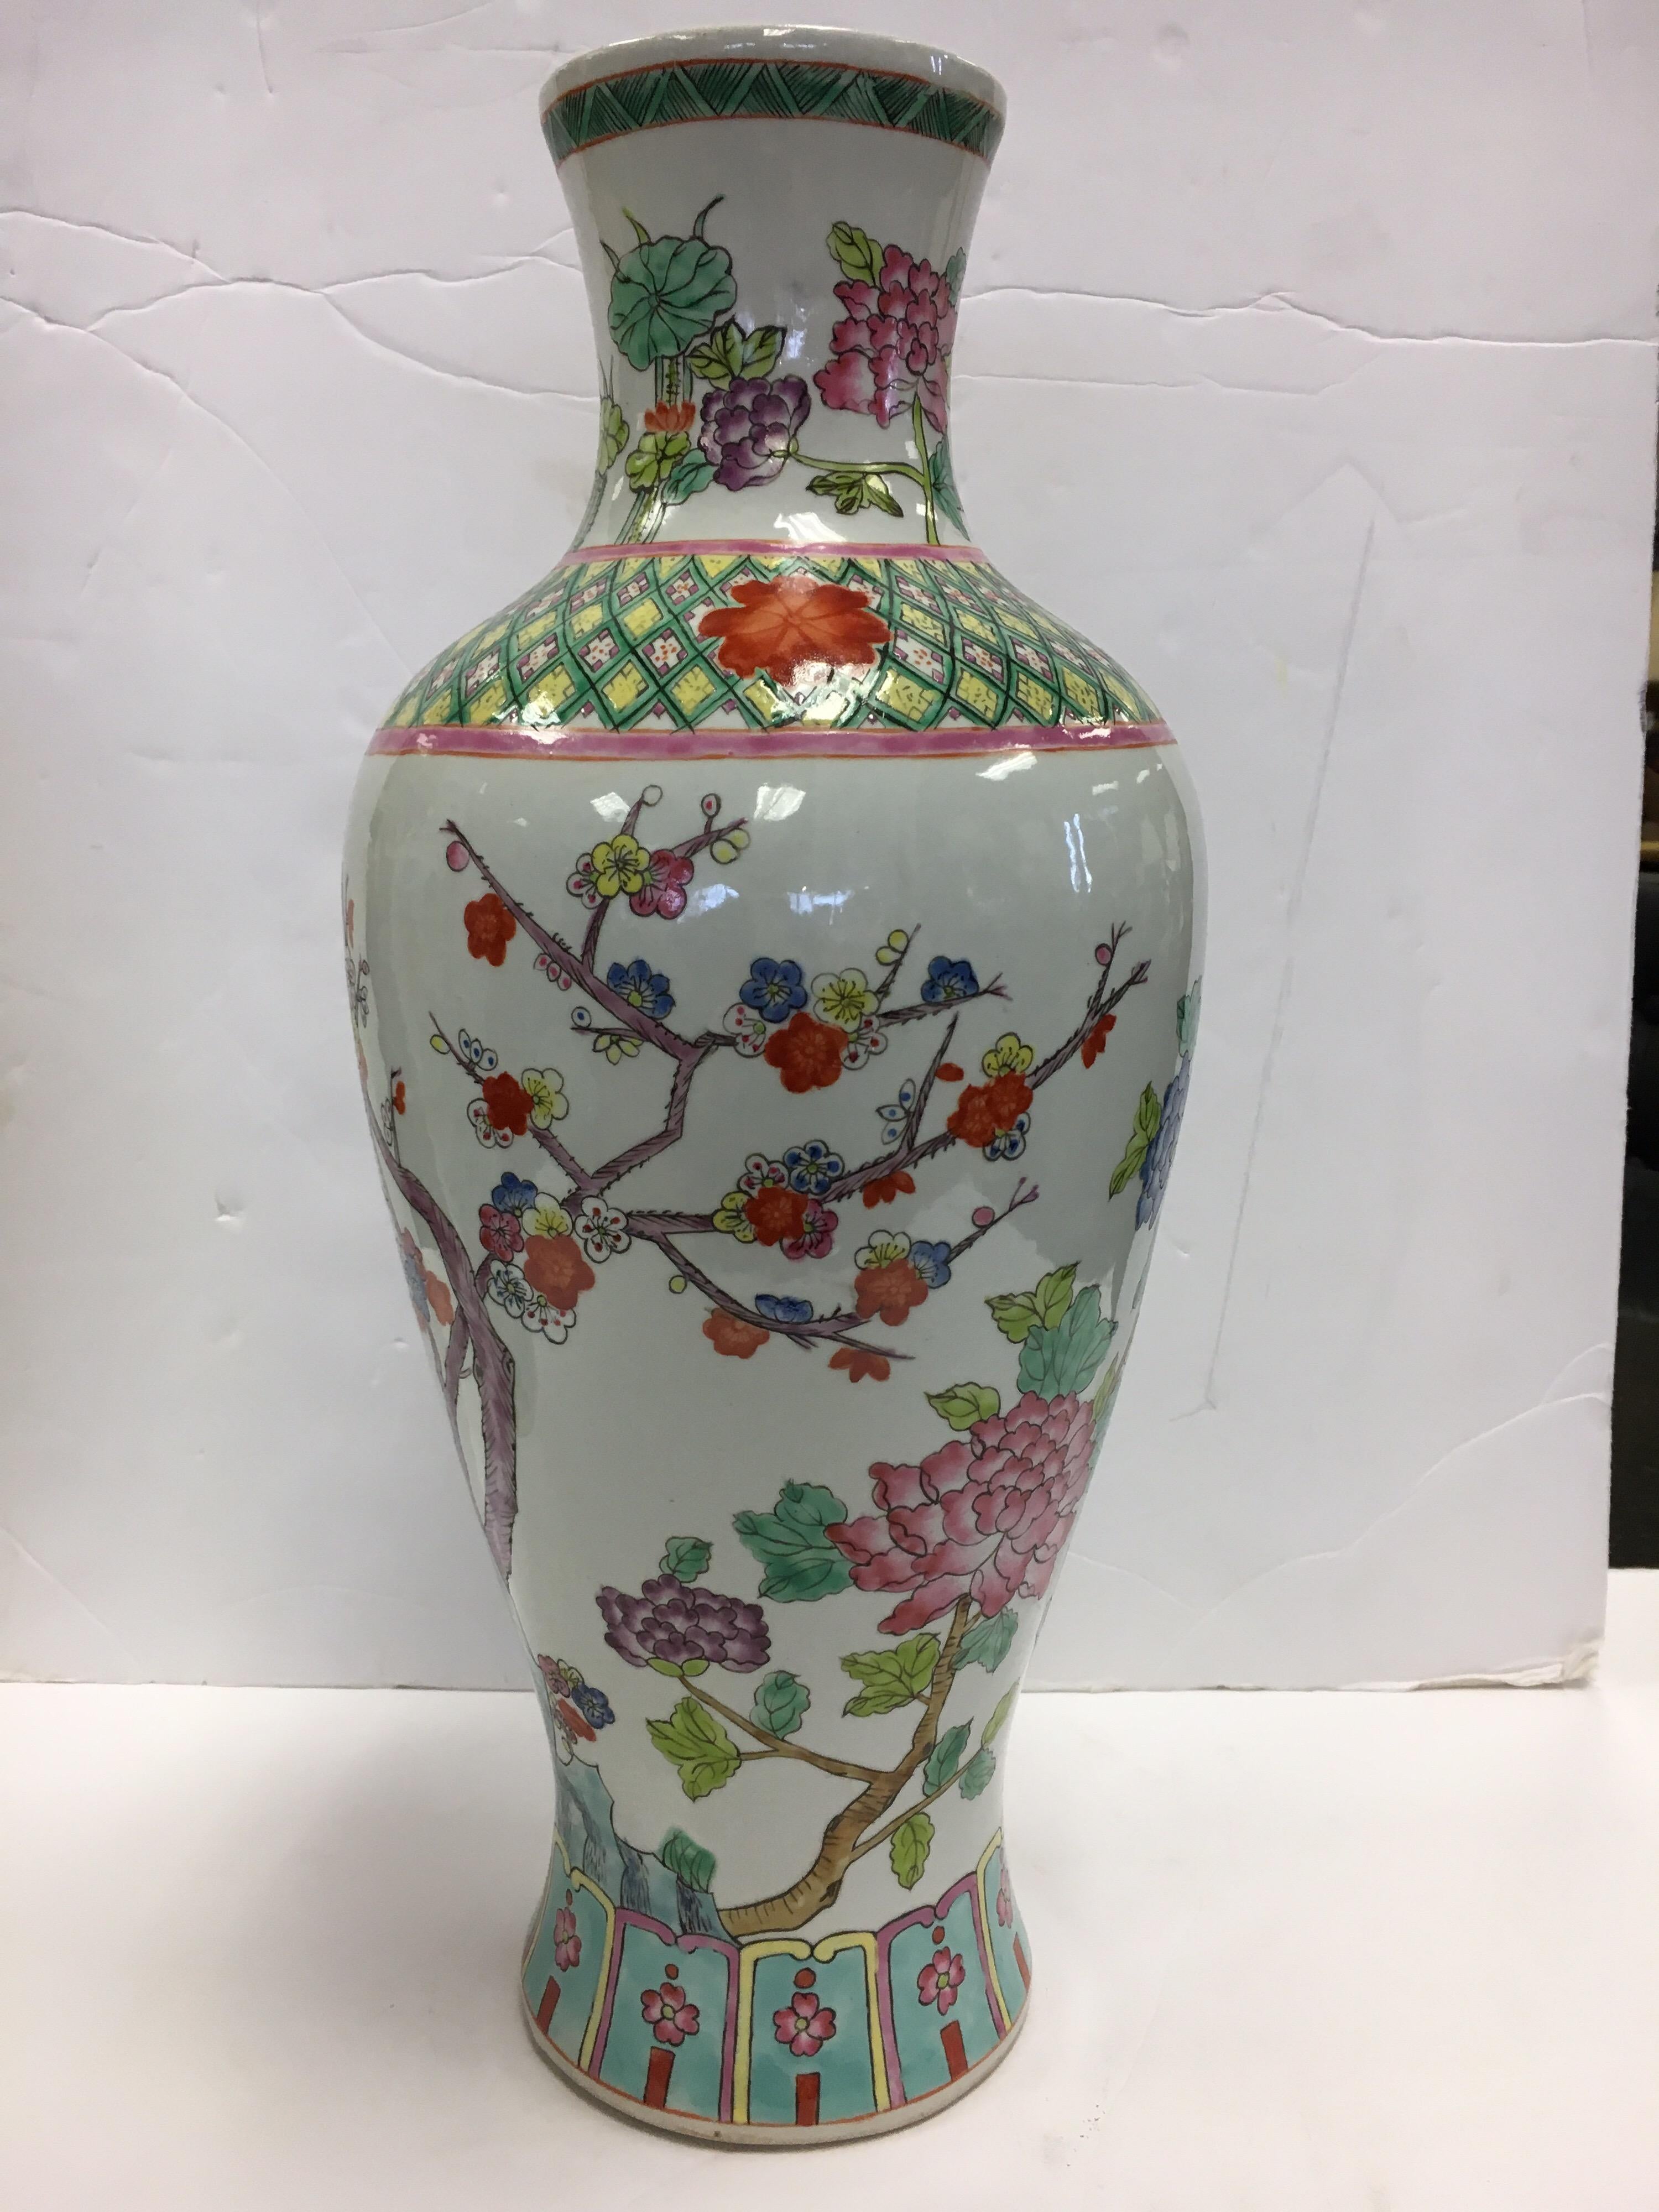 20th Century Chinese Asian Baluster Form Porcelain Vase with Intricate Painted Flowers & Vine